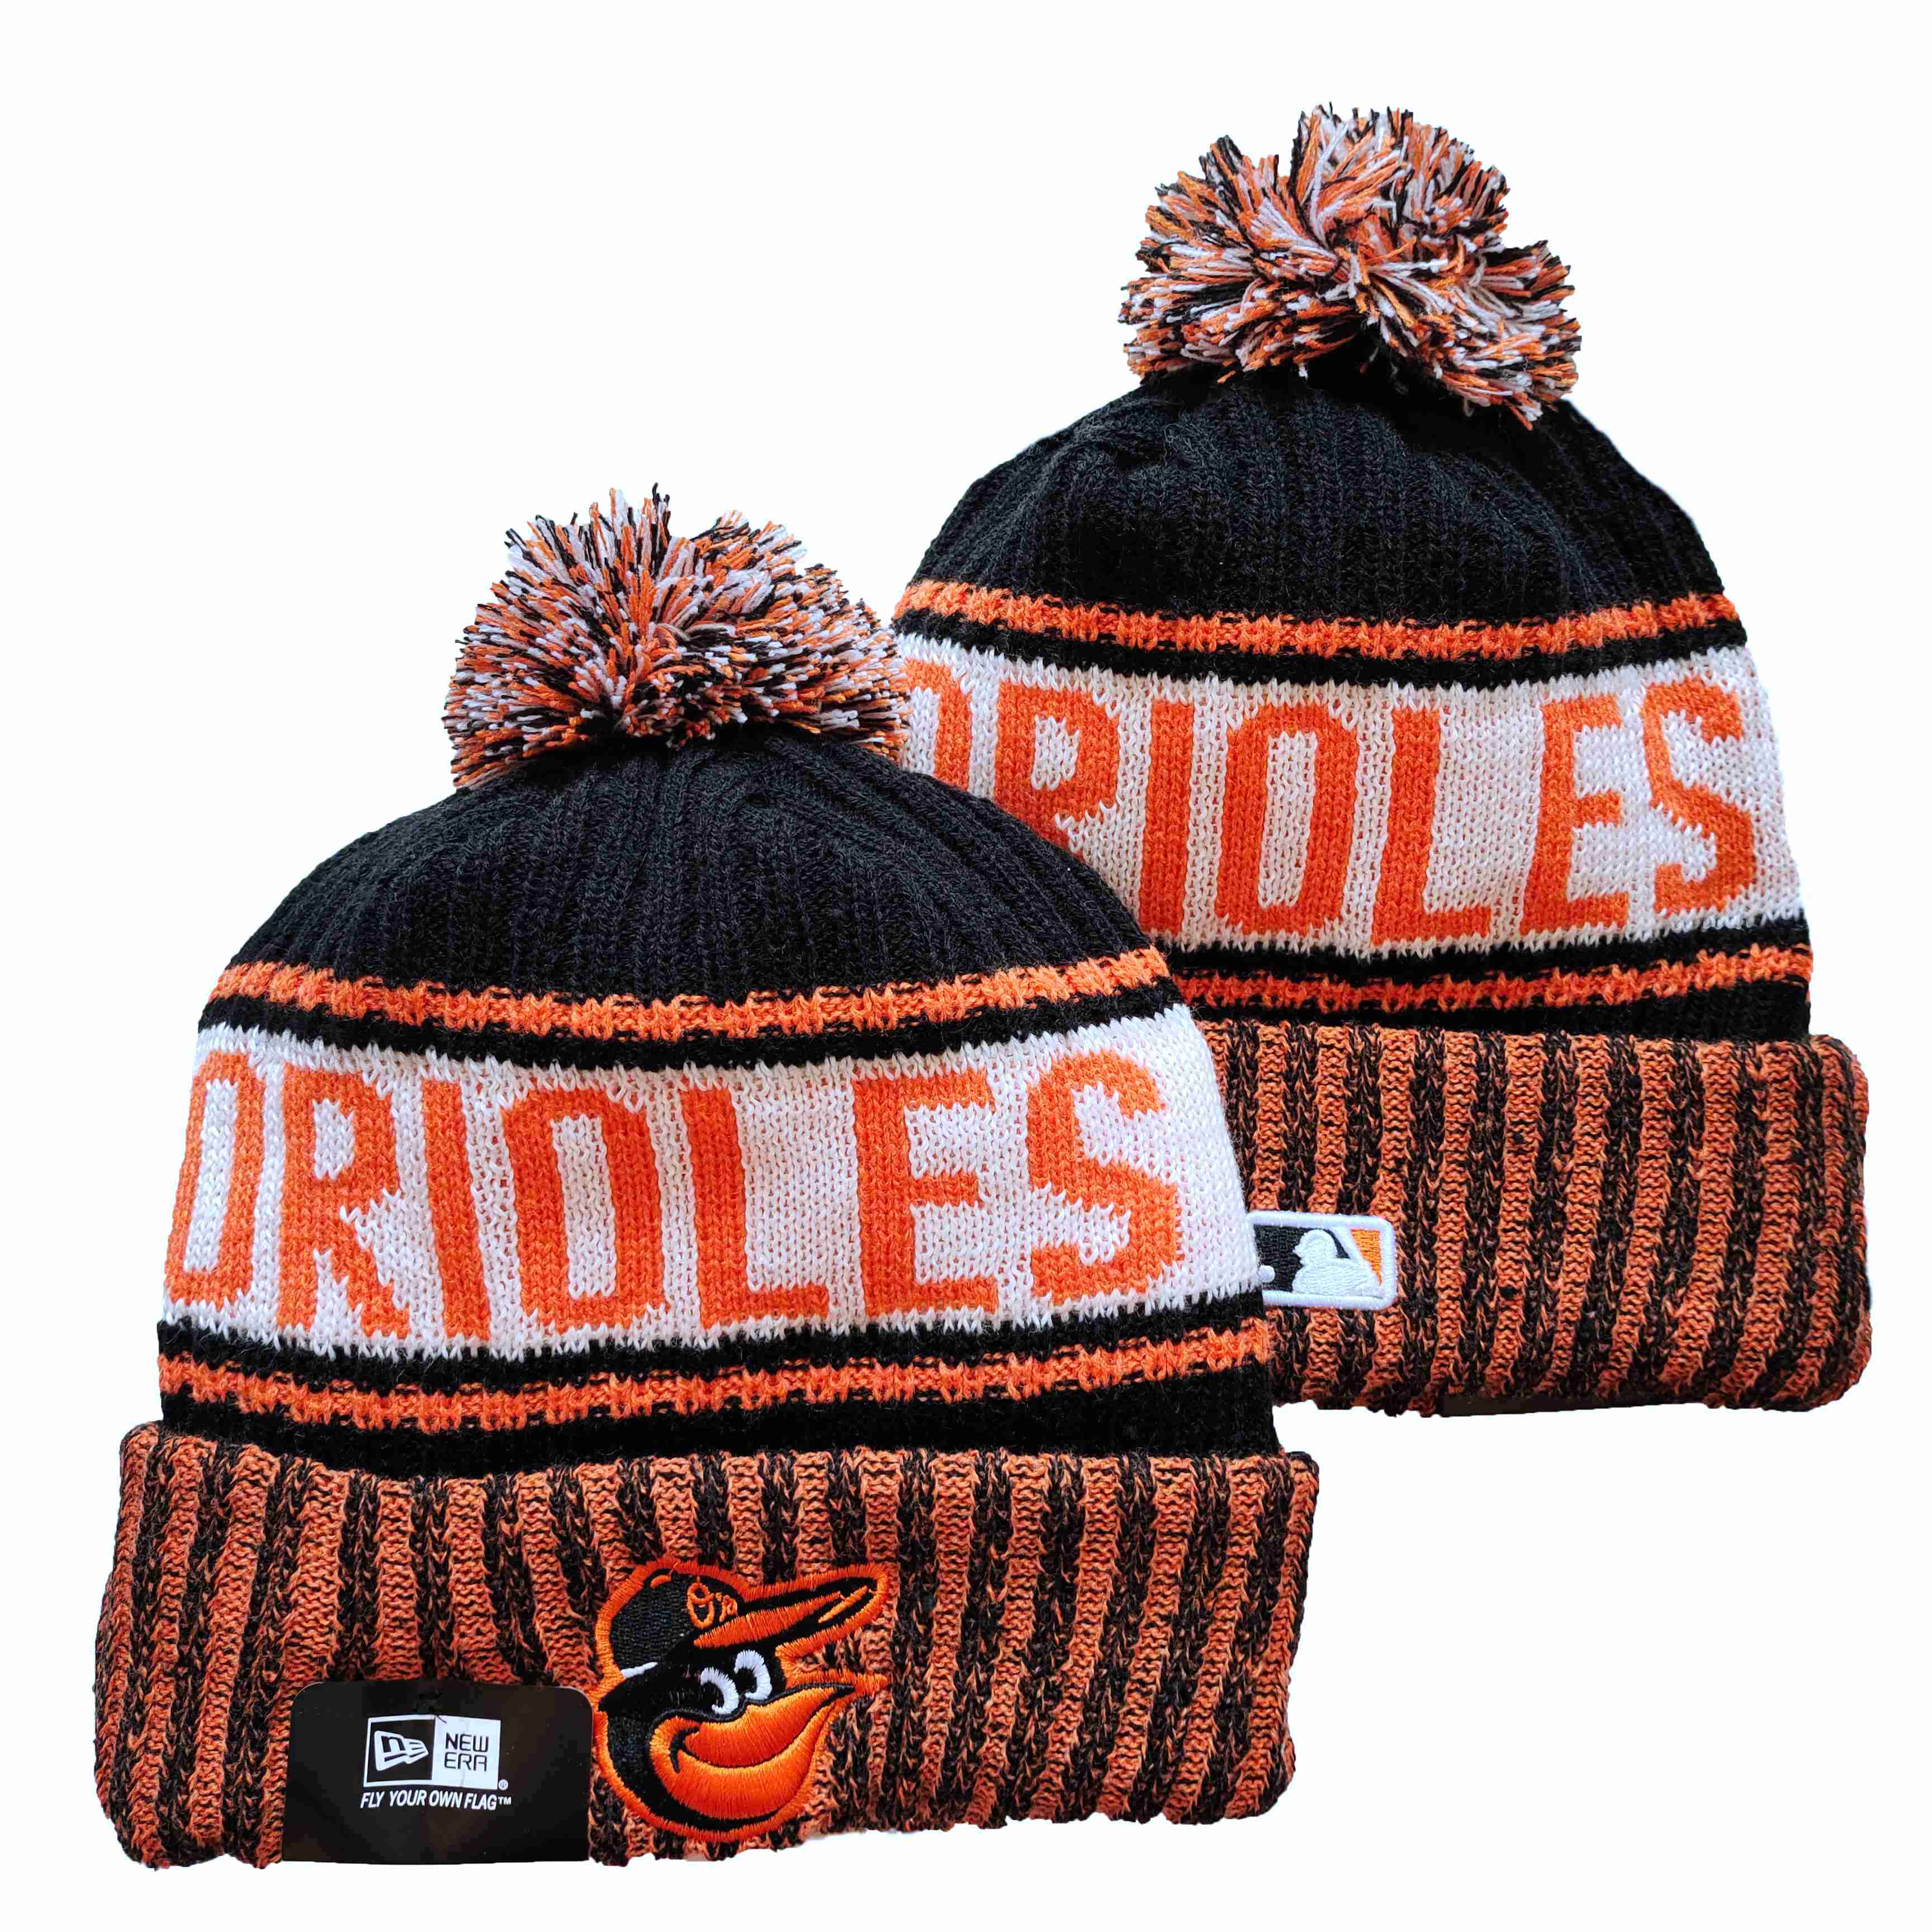 MLB Baltimore Orioles Beanies Knit Hats-YD103